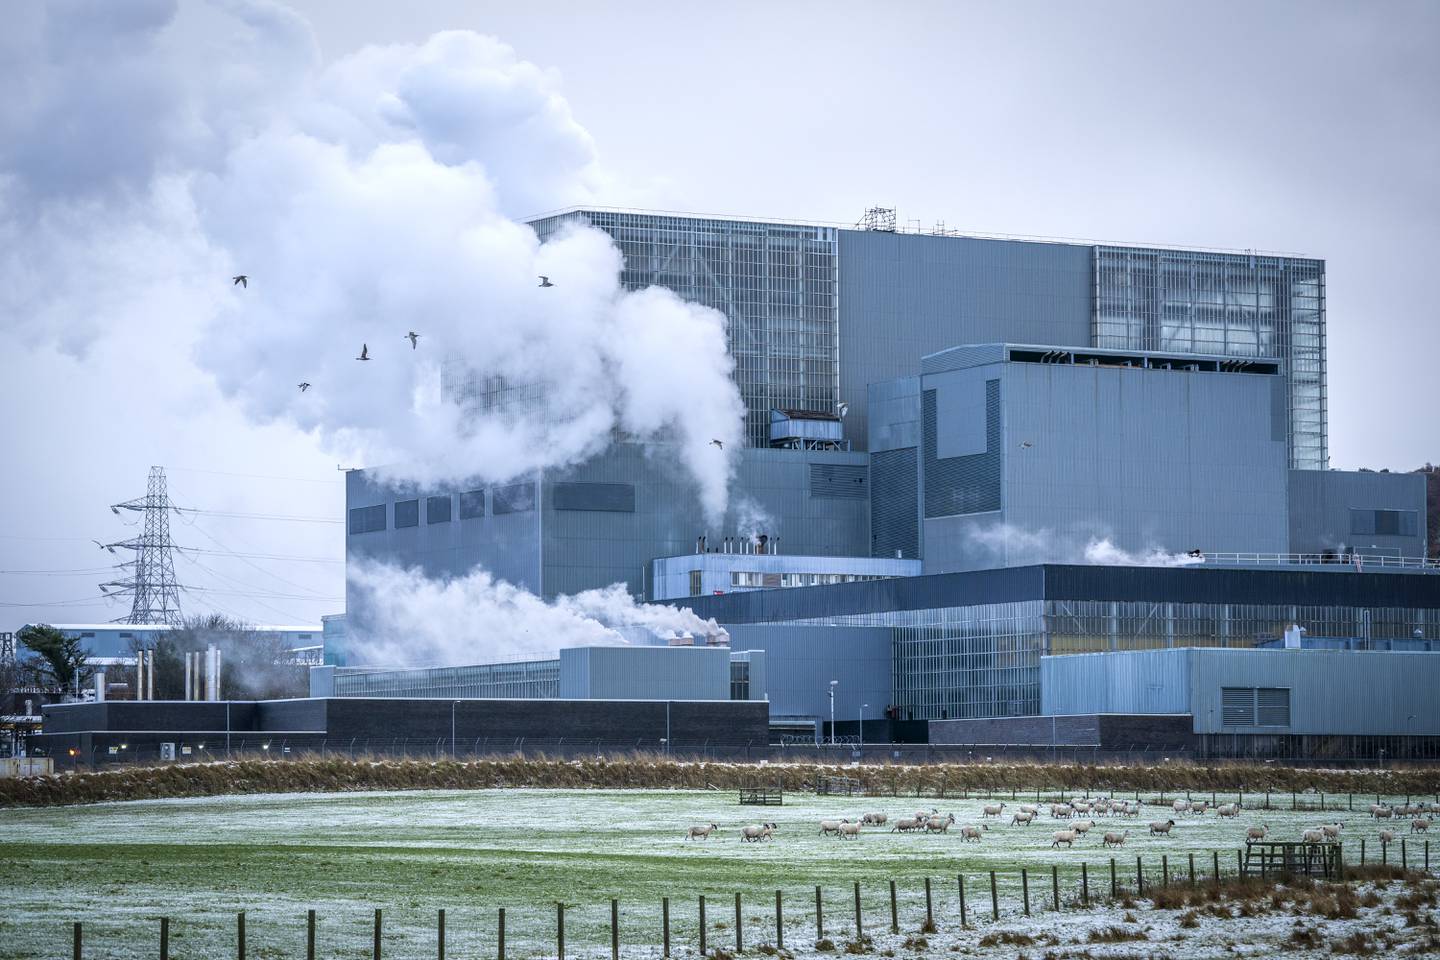 Steam, which would have been used to turn the turbines, is released from Reactor 4 at Hunterston B nuclear power plant in North Ayrshire, which is being permanently shut down almost 46 years after it started generating electricity. PA